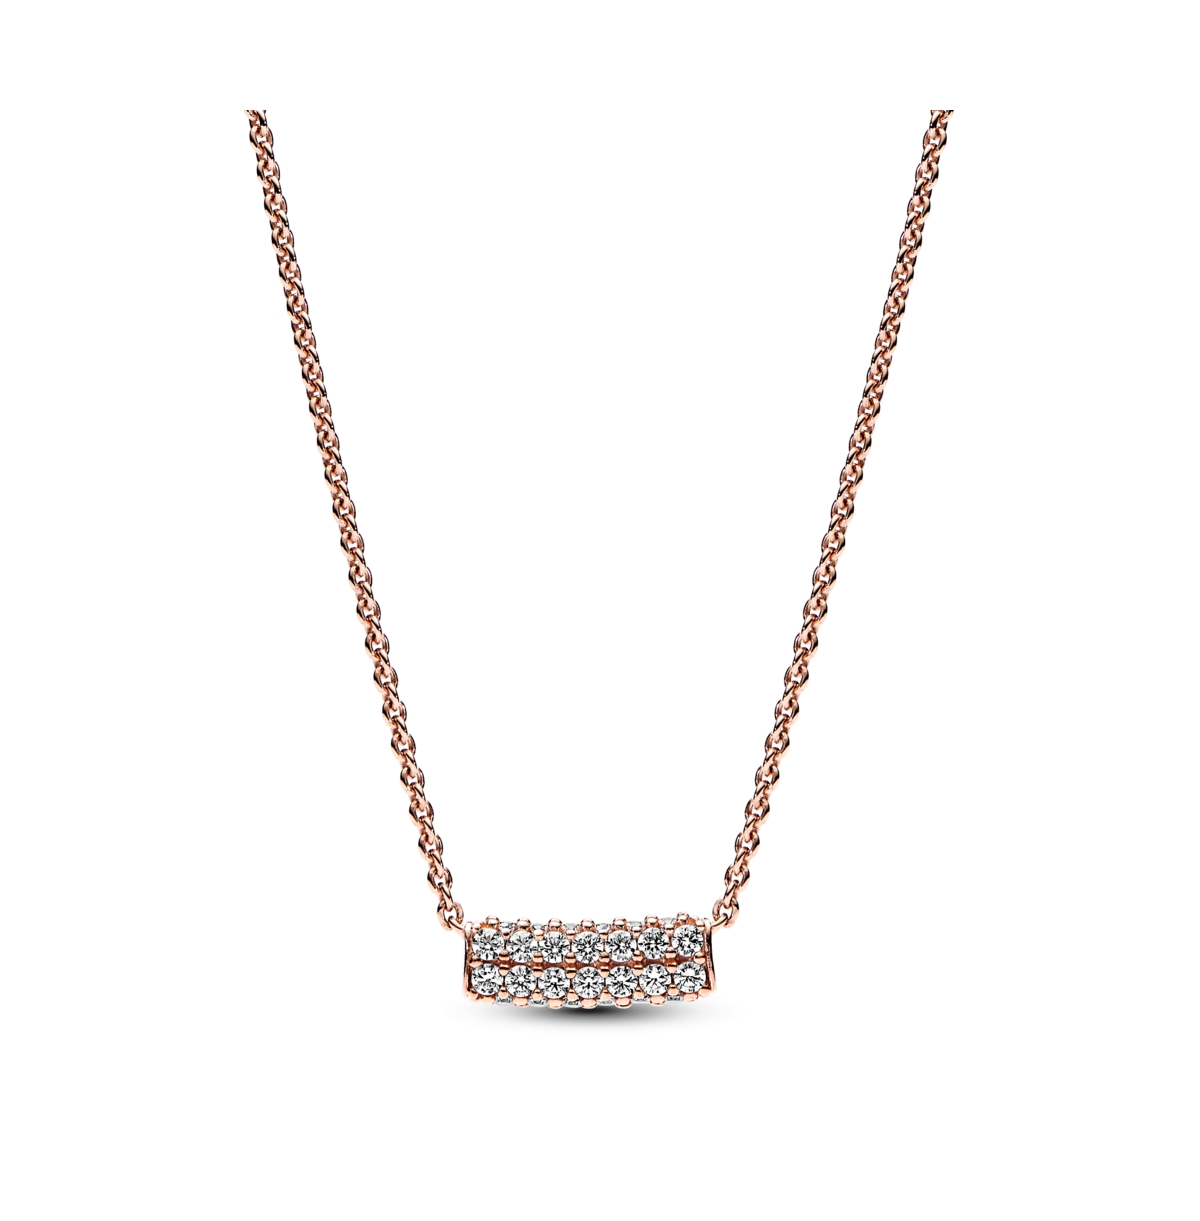 Timeless 14K Rose Gold-Plated Pave Cubic Zirconia Double-Row Bar Collier Necklace - Rose Gold